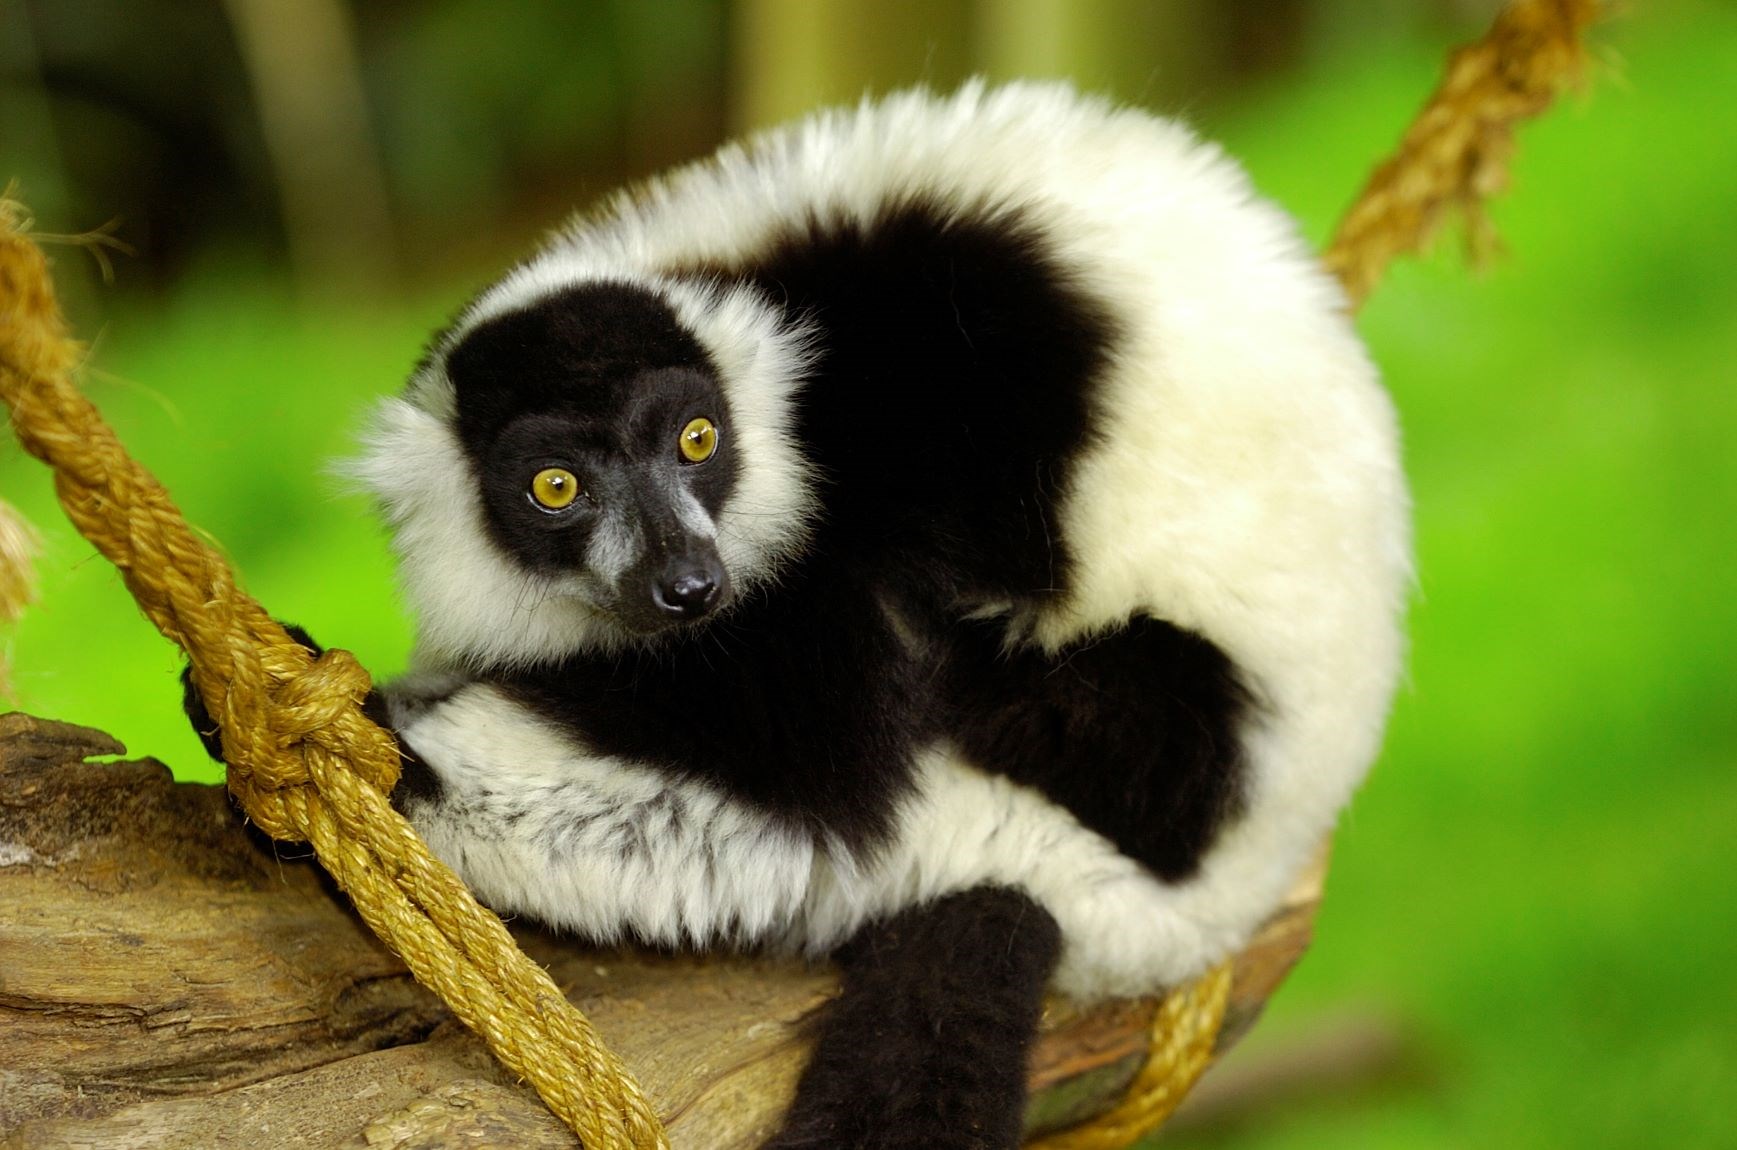 Black and White Ruffed Lemur perches on suspended wooden log 